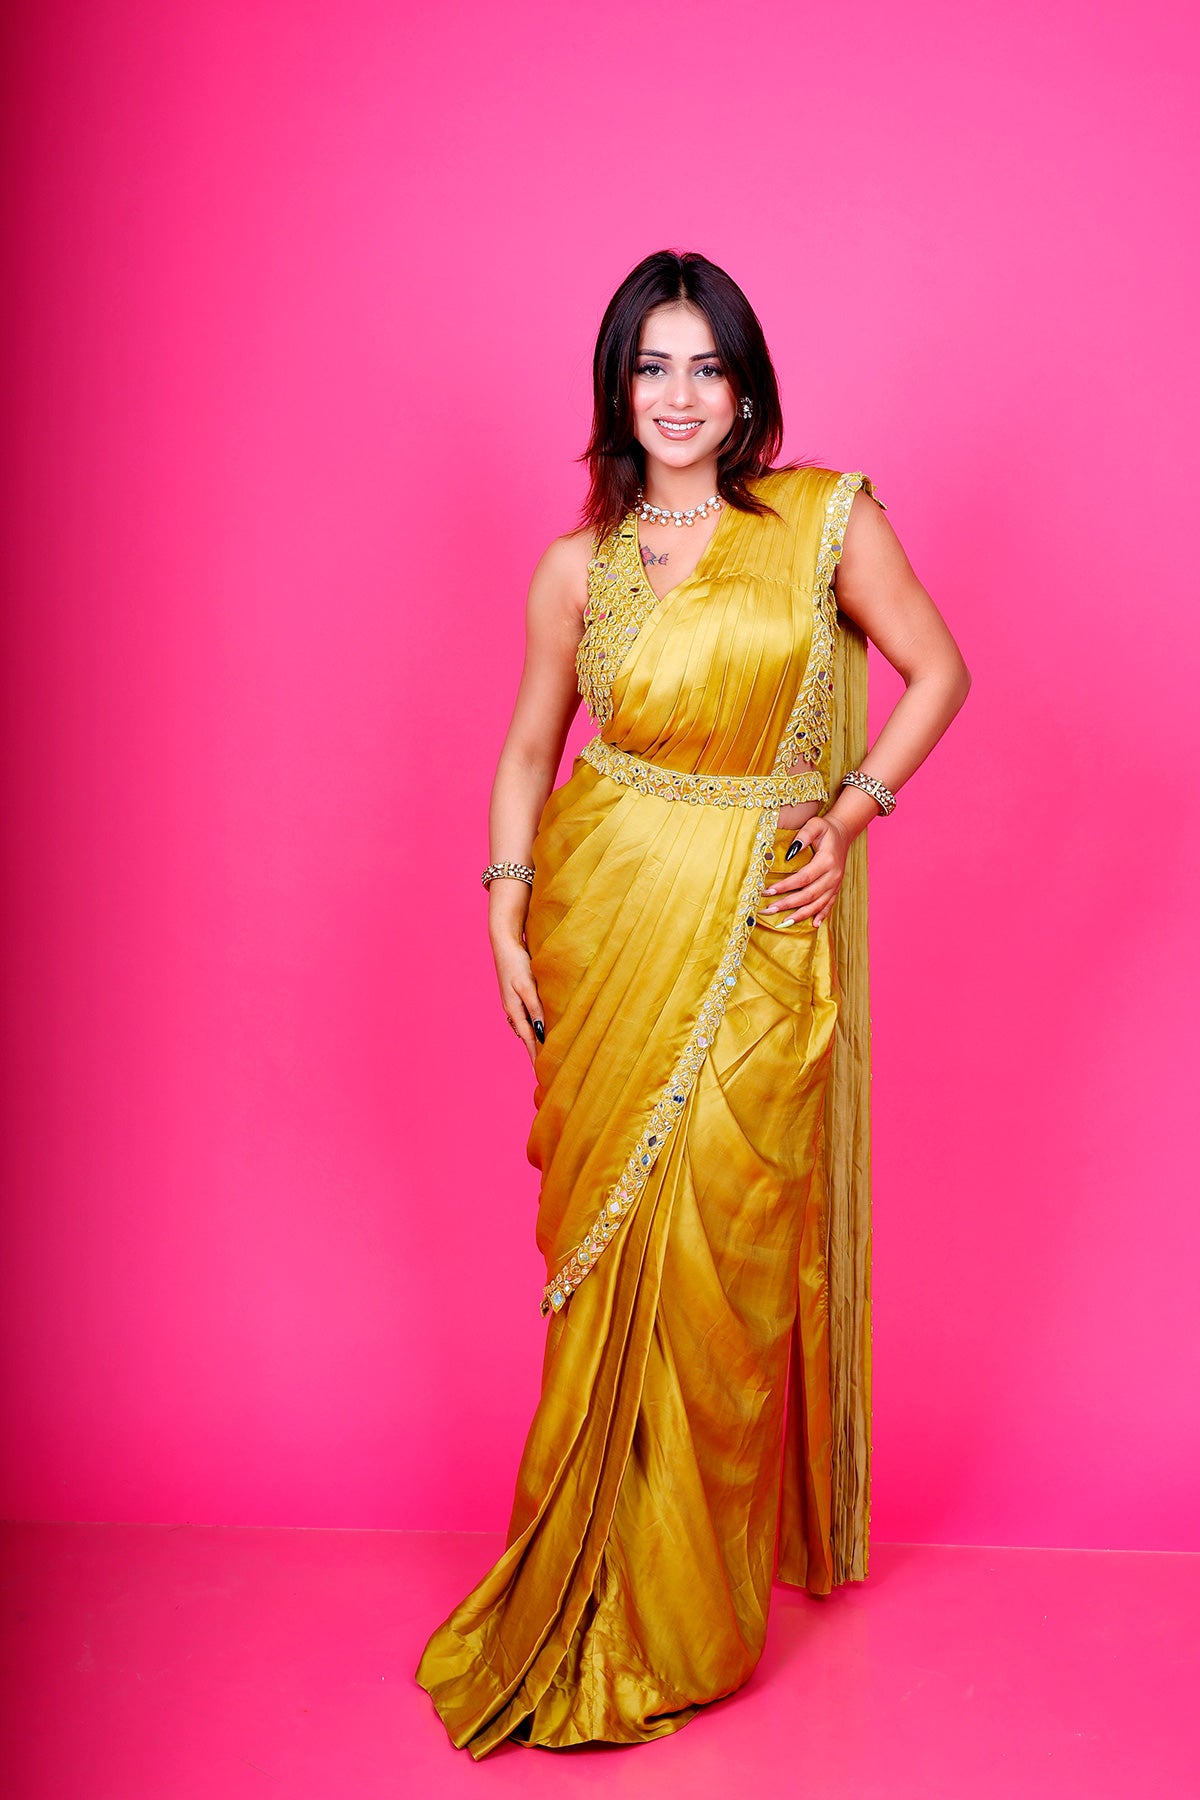 Yellow Drape saree with mirror and pearl work blouse along with waist belt